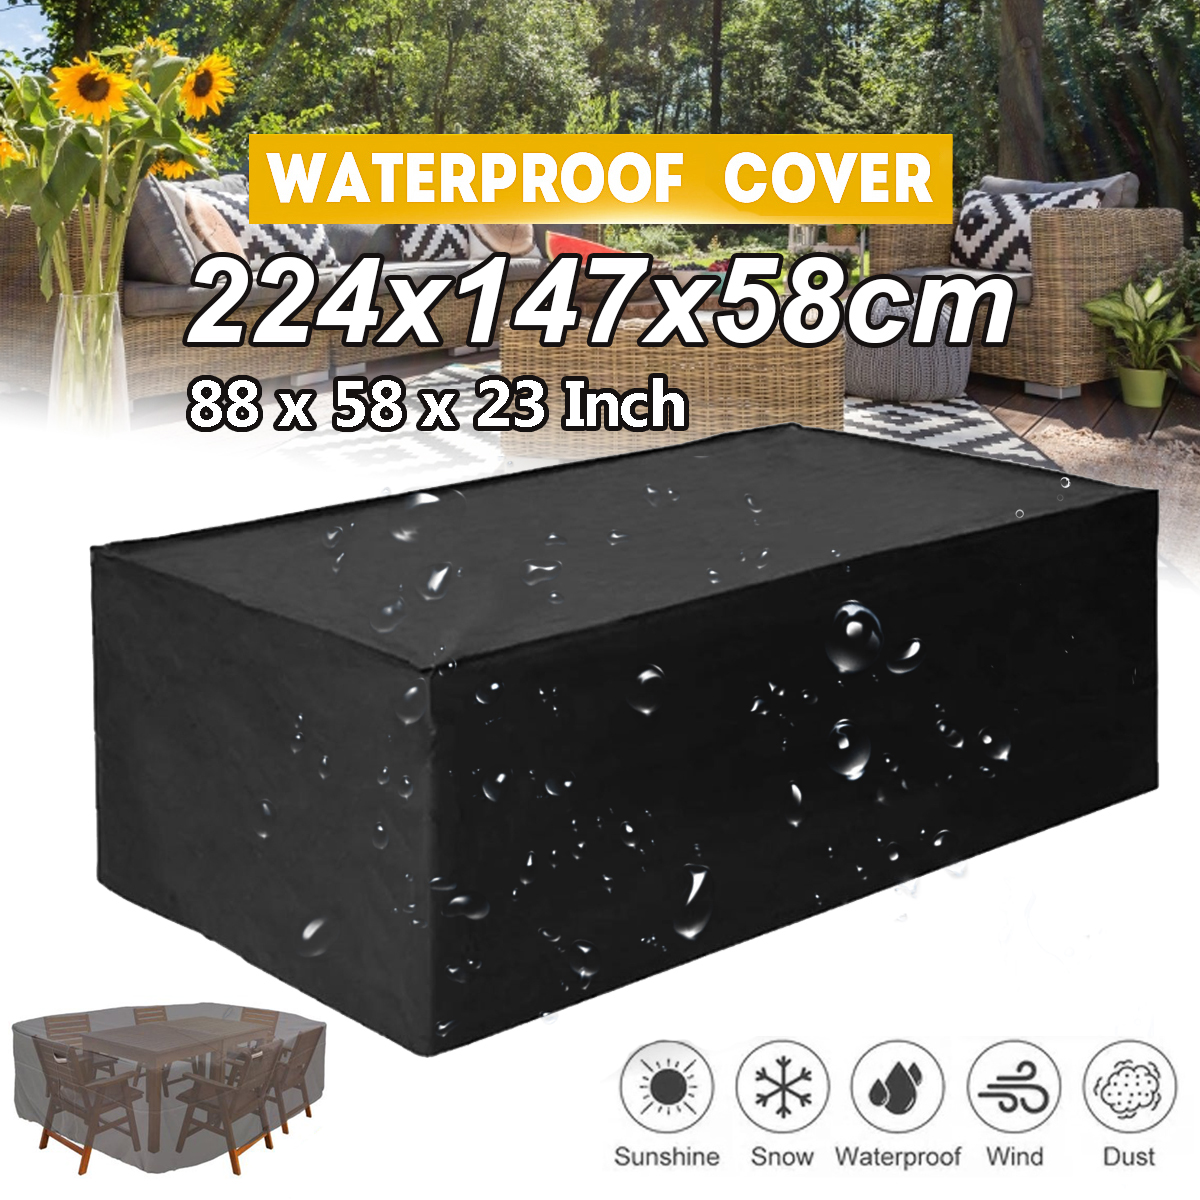 210D-Outdoor-Furniture-Cover-Table-Chair-Shelter-Anti-Dust-Rain-UV-Waterproof-1673079-1